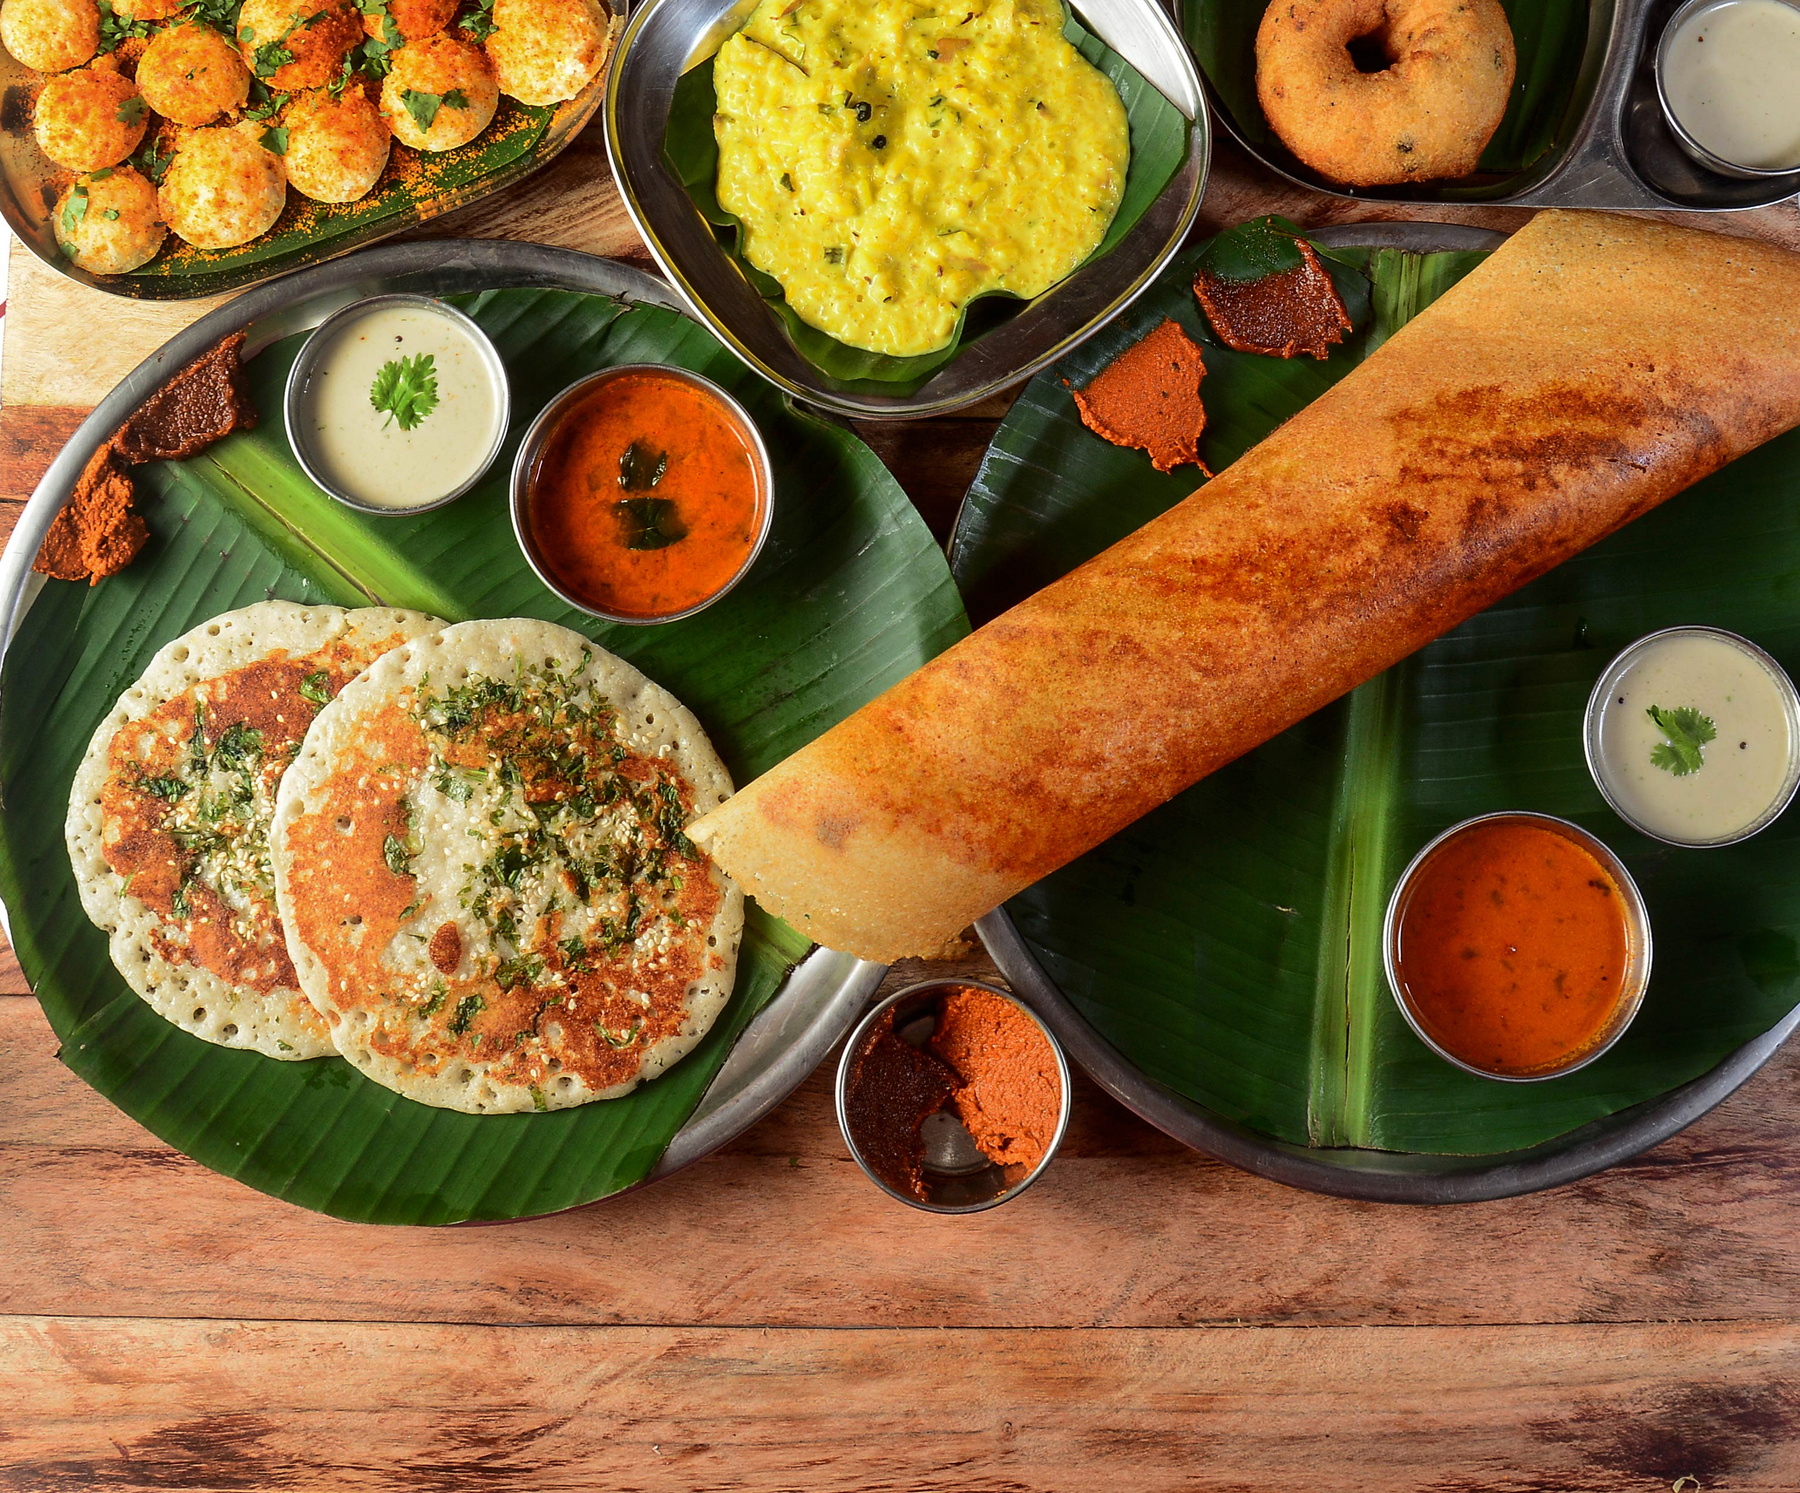 Traditional South Indian cuisine spread featuring dosa, idli, vada, and chutneys.